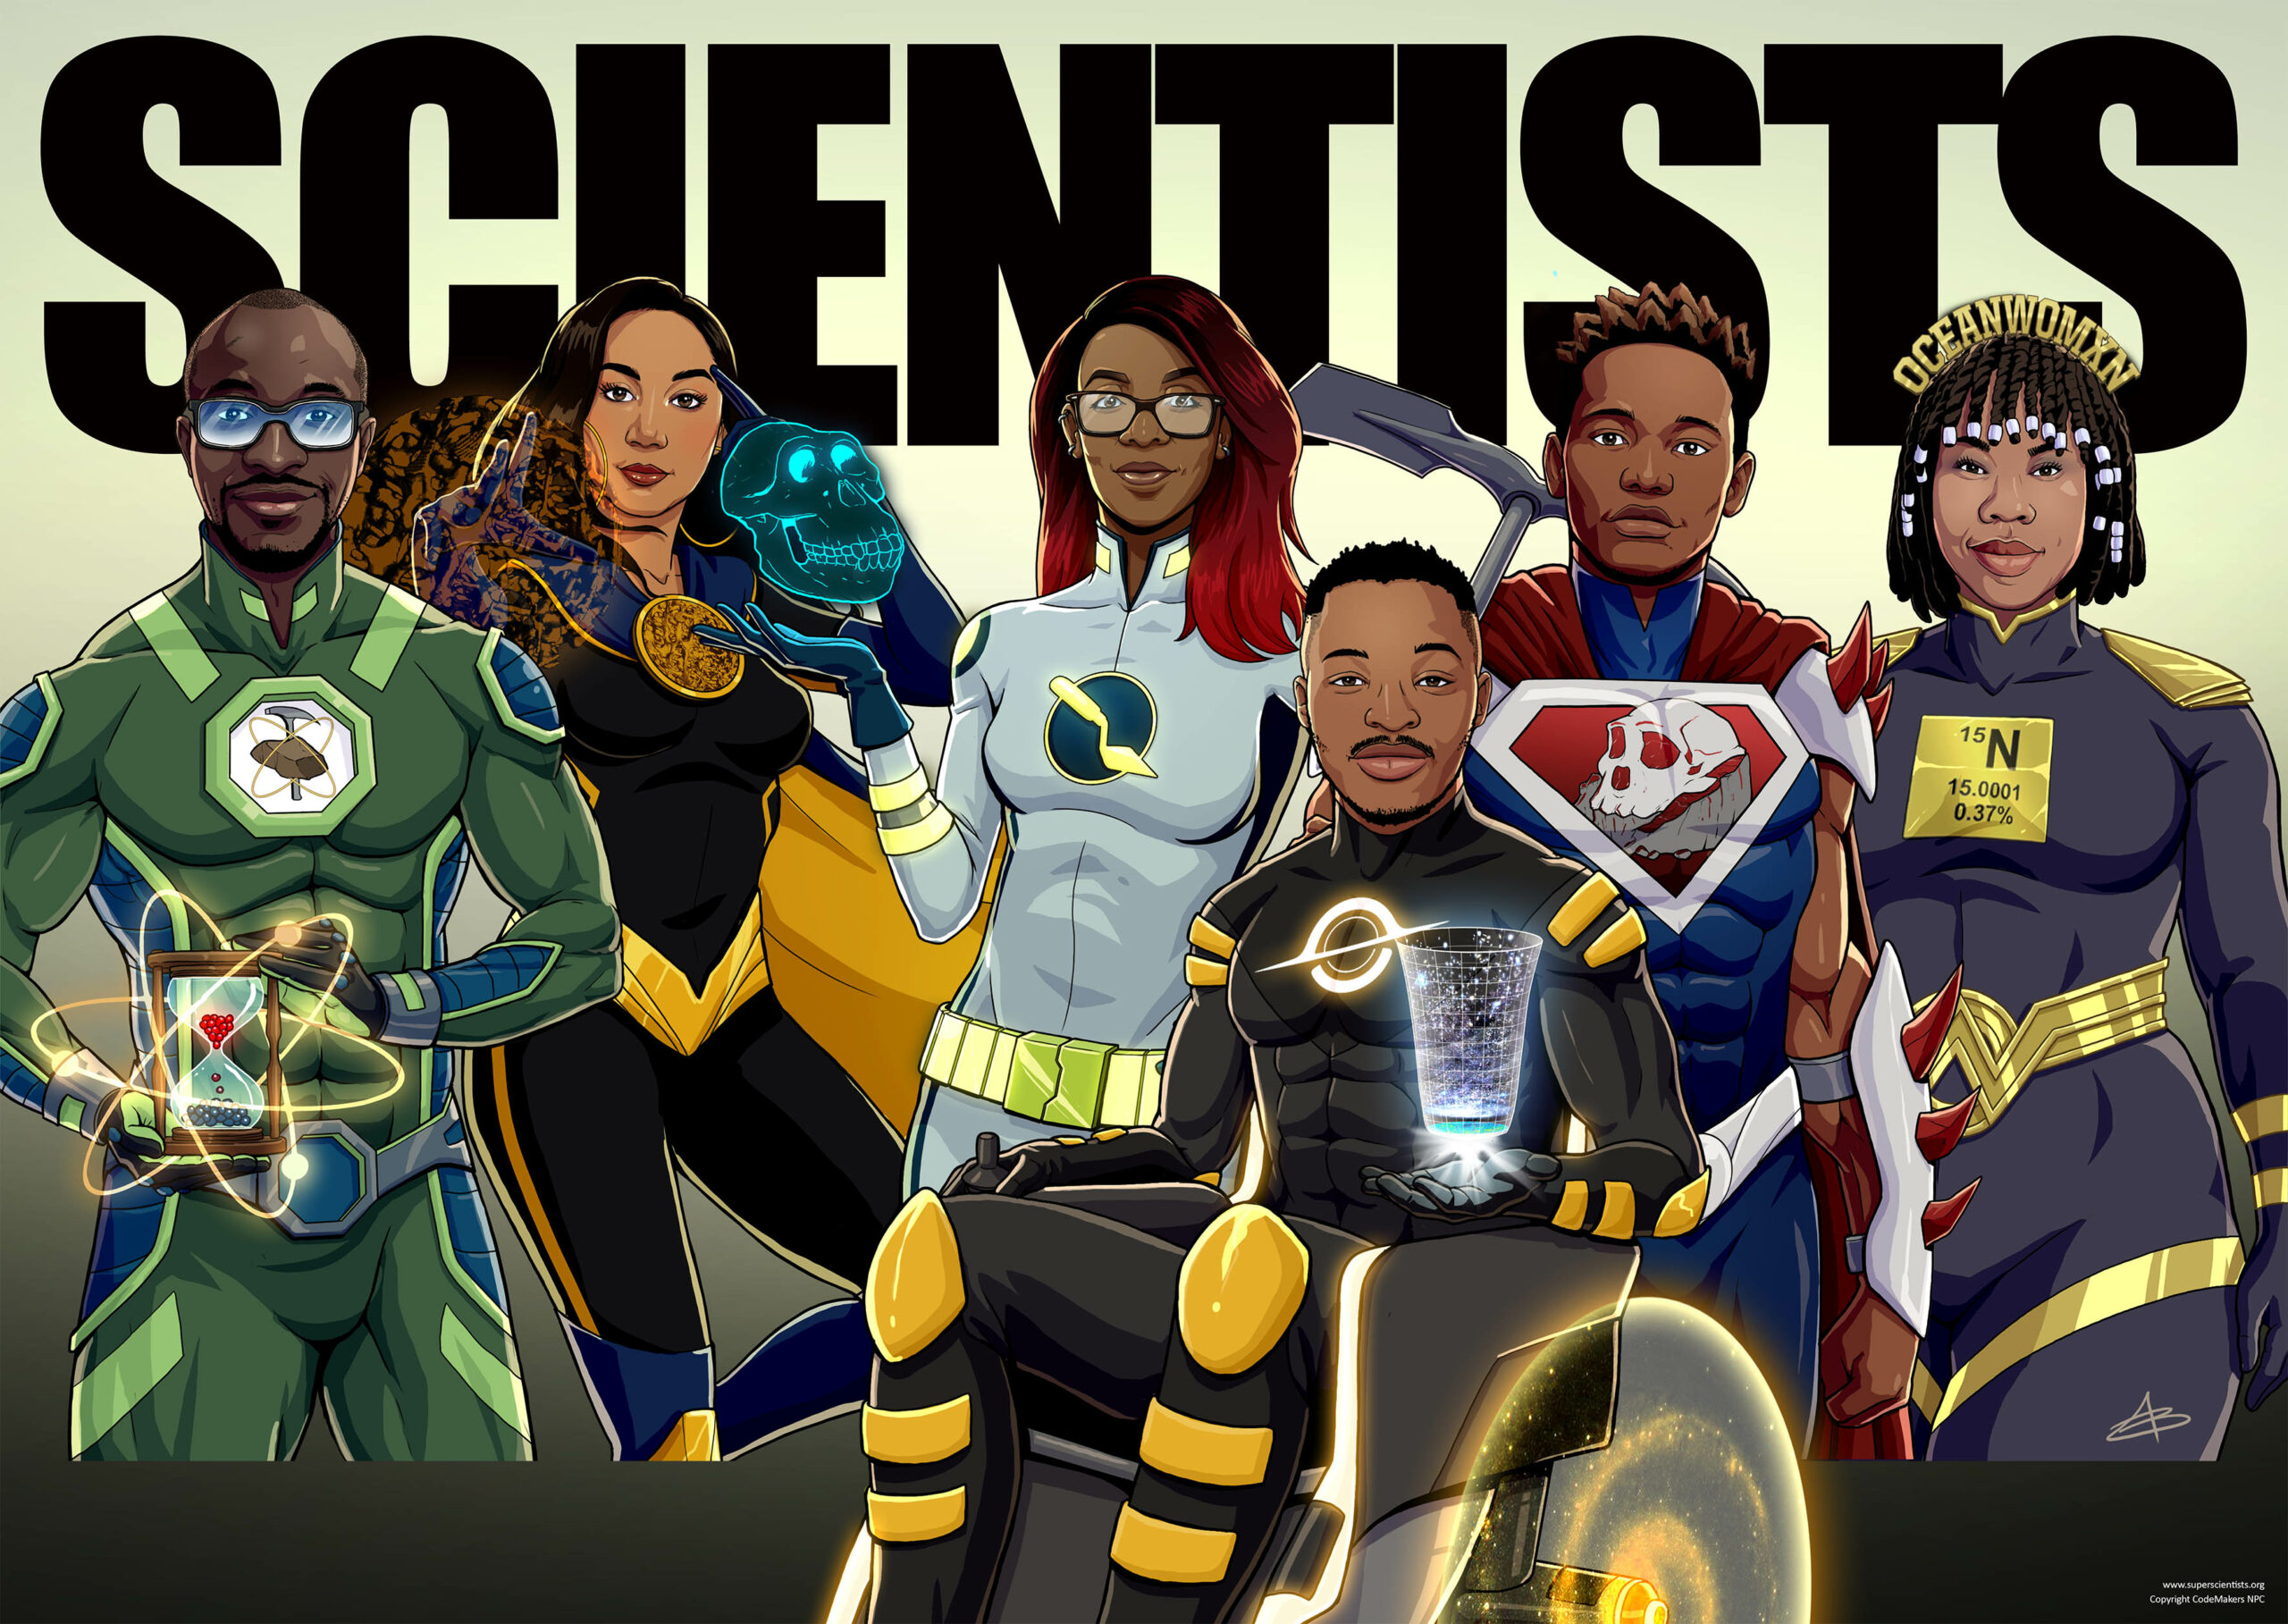 Cosmic Dawn, Nitro, GeoTime—diverse South African scientists get superhero  alter egos, Science